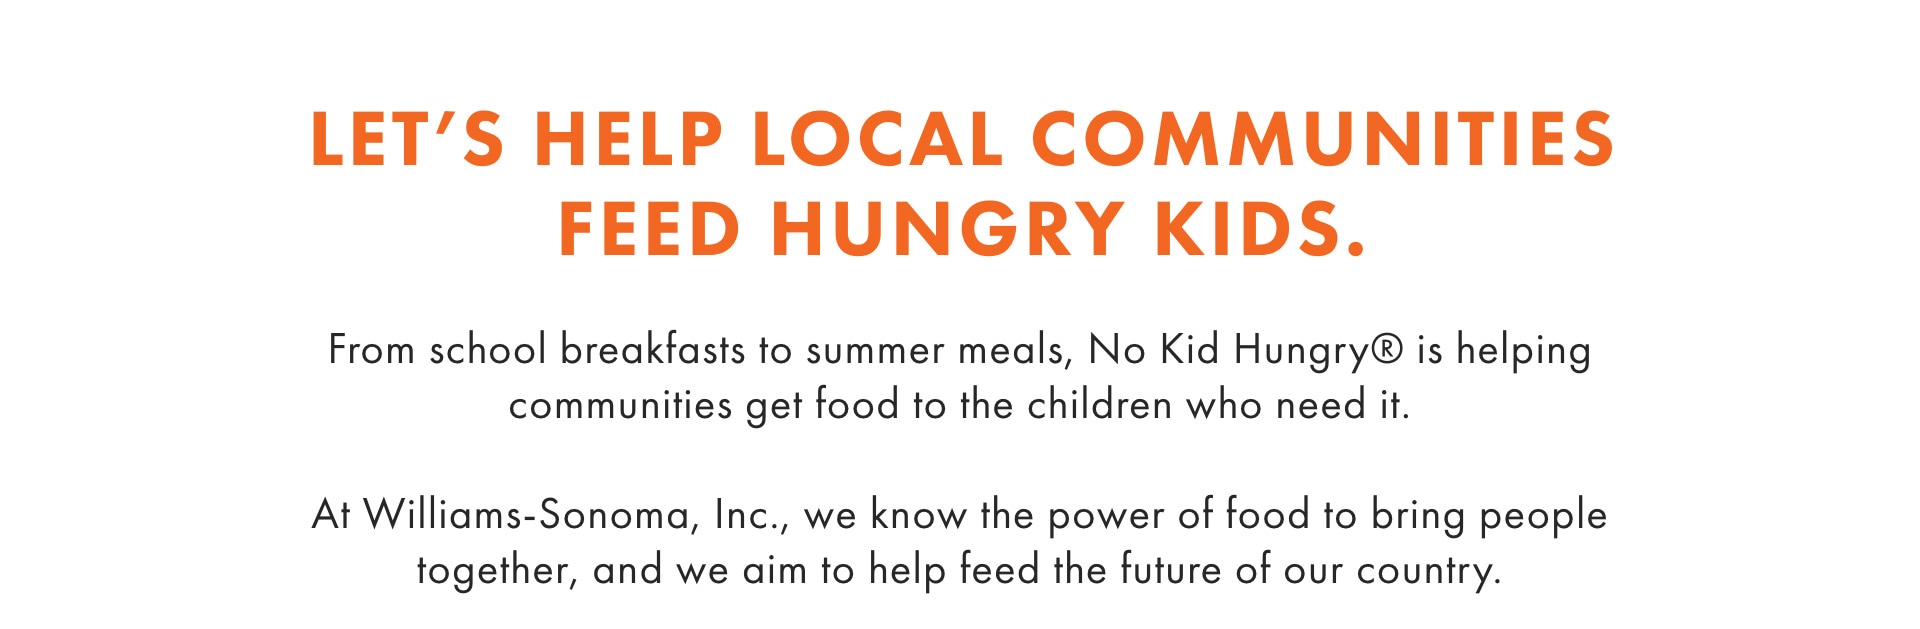 Let's Help Local Communities Feed Hungry Kids